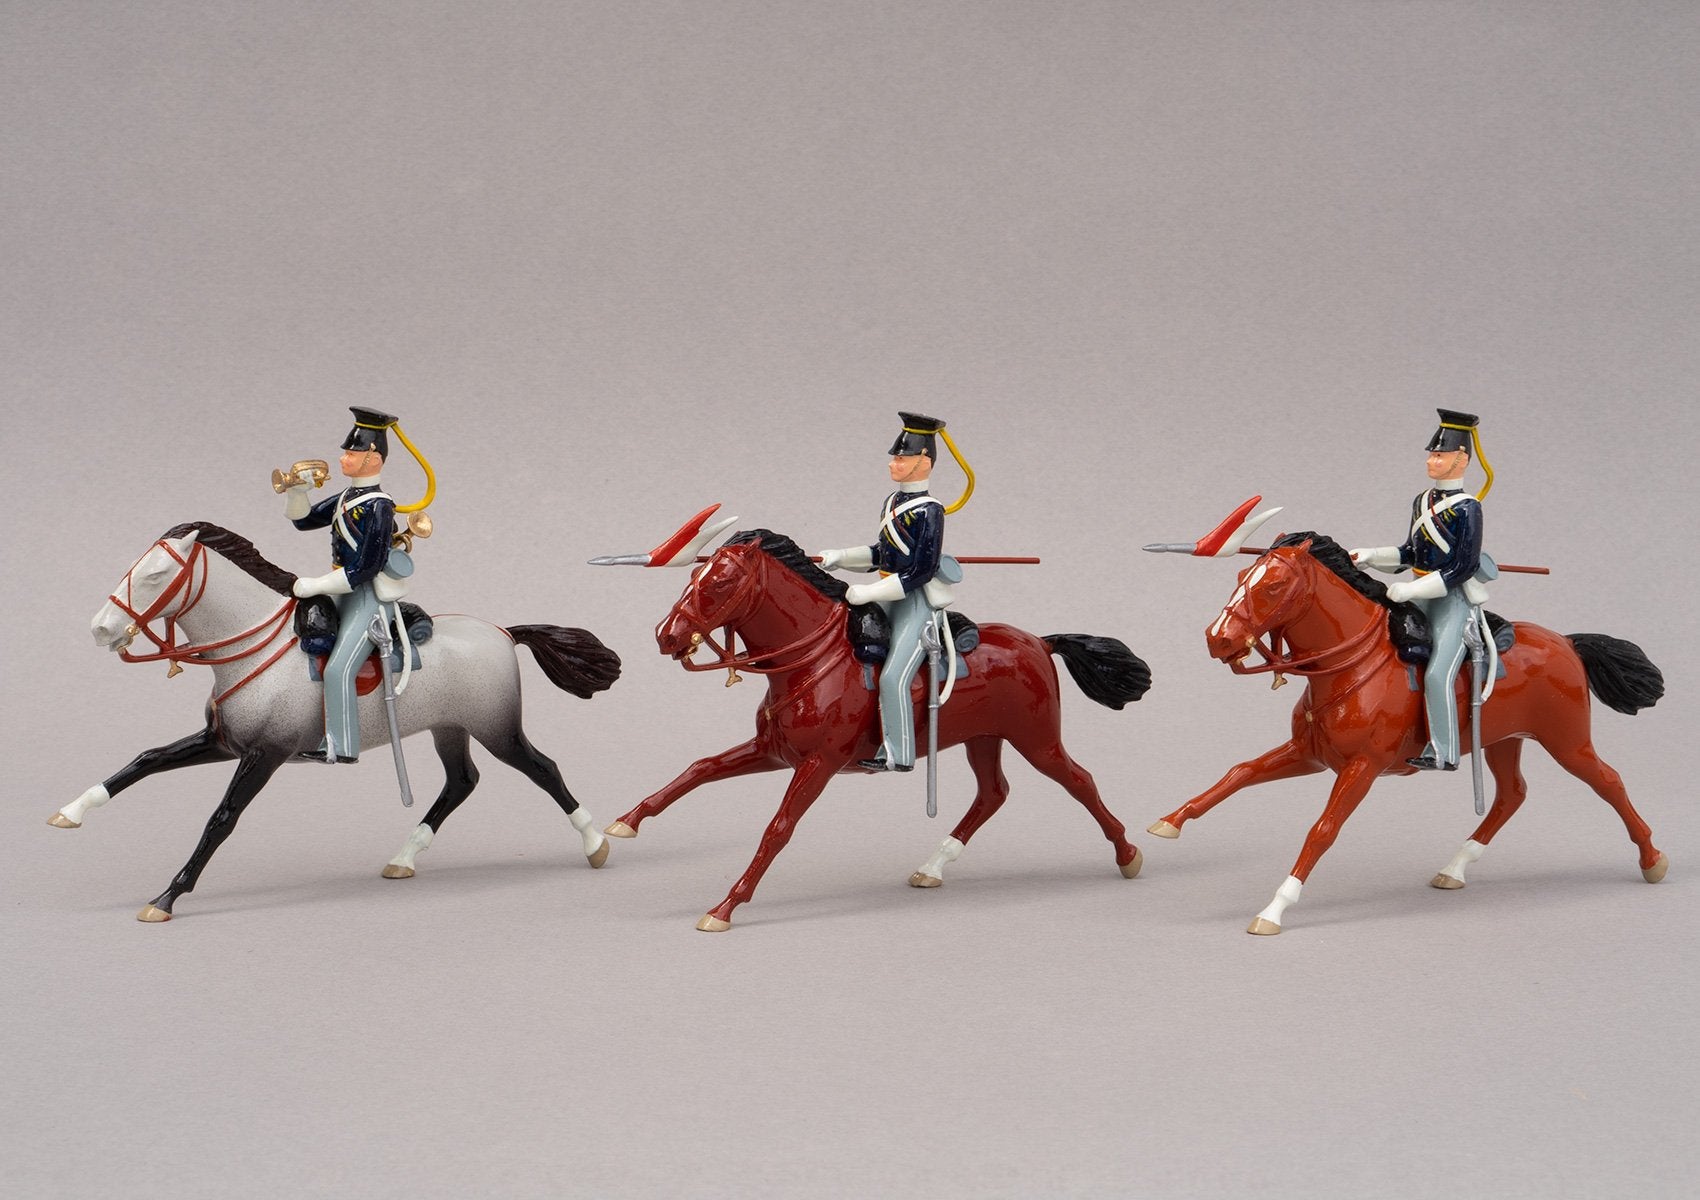 Set 91 17th Lancers 1854 | British Cavalry | Crimean War | Three mounted lancers, one bugler, two lancers | Balaclava, Sevastapol, Alma, Charge of the Light Brigade | © Imperial Productions | Sculpt by David Cowe